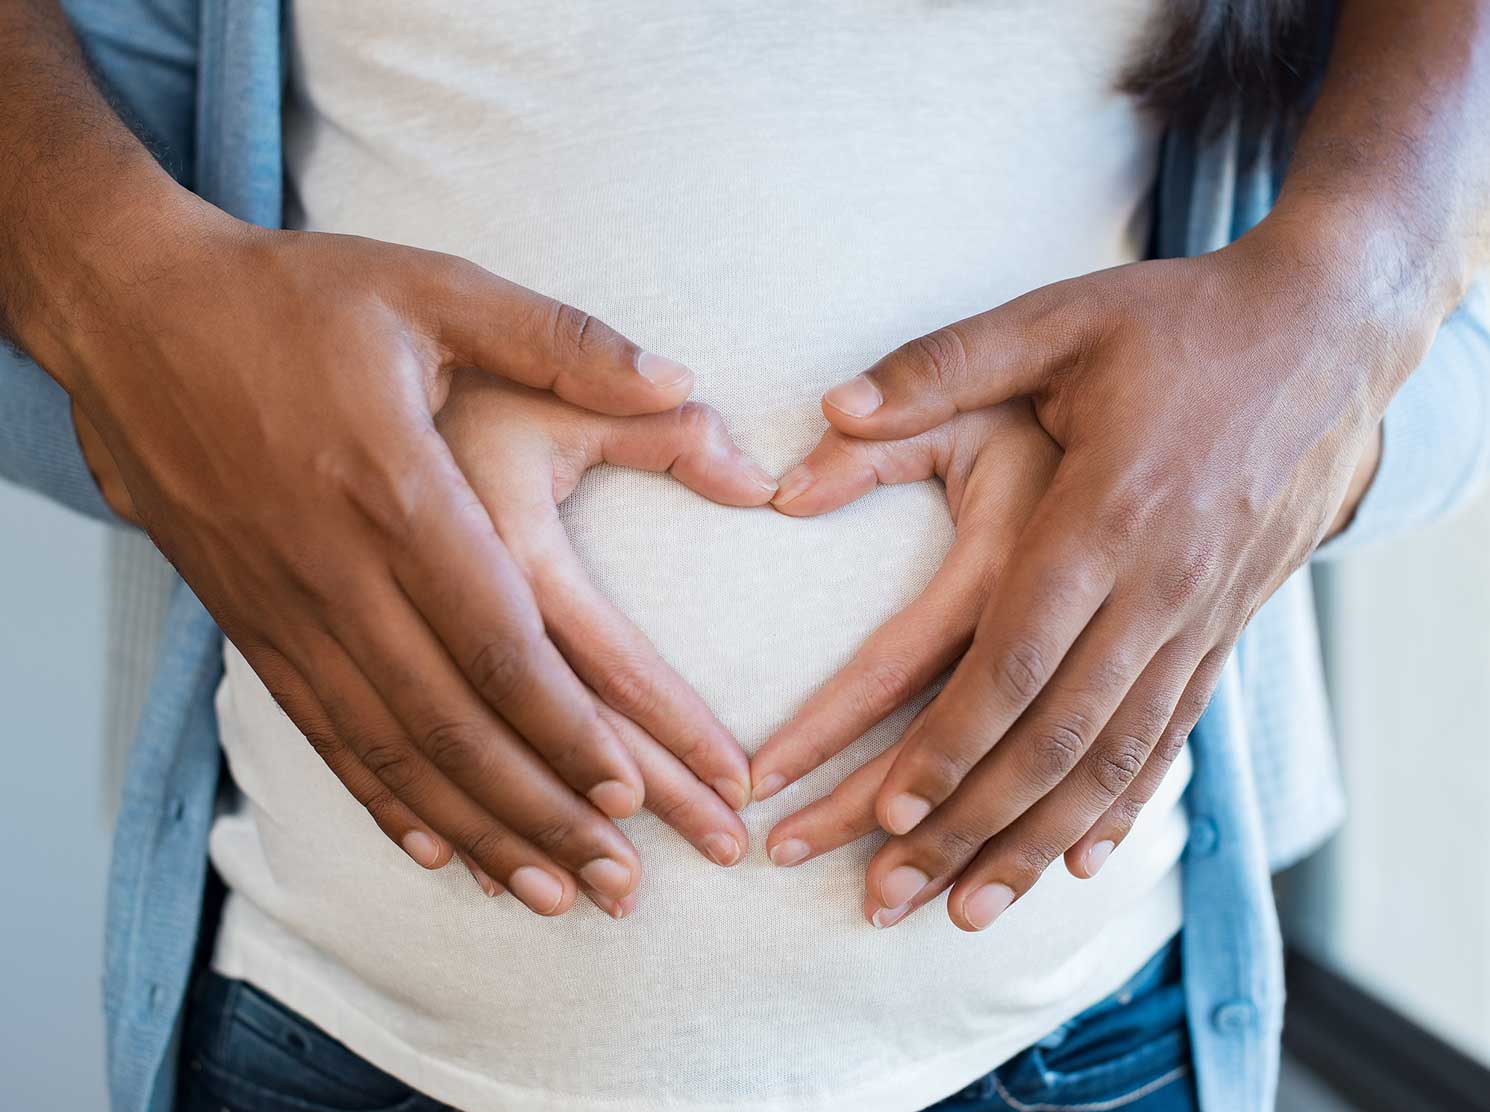 Couple making heart shape with hands on pregnant woman's belly